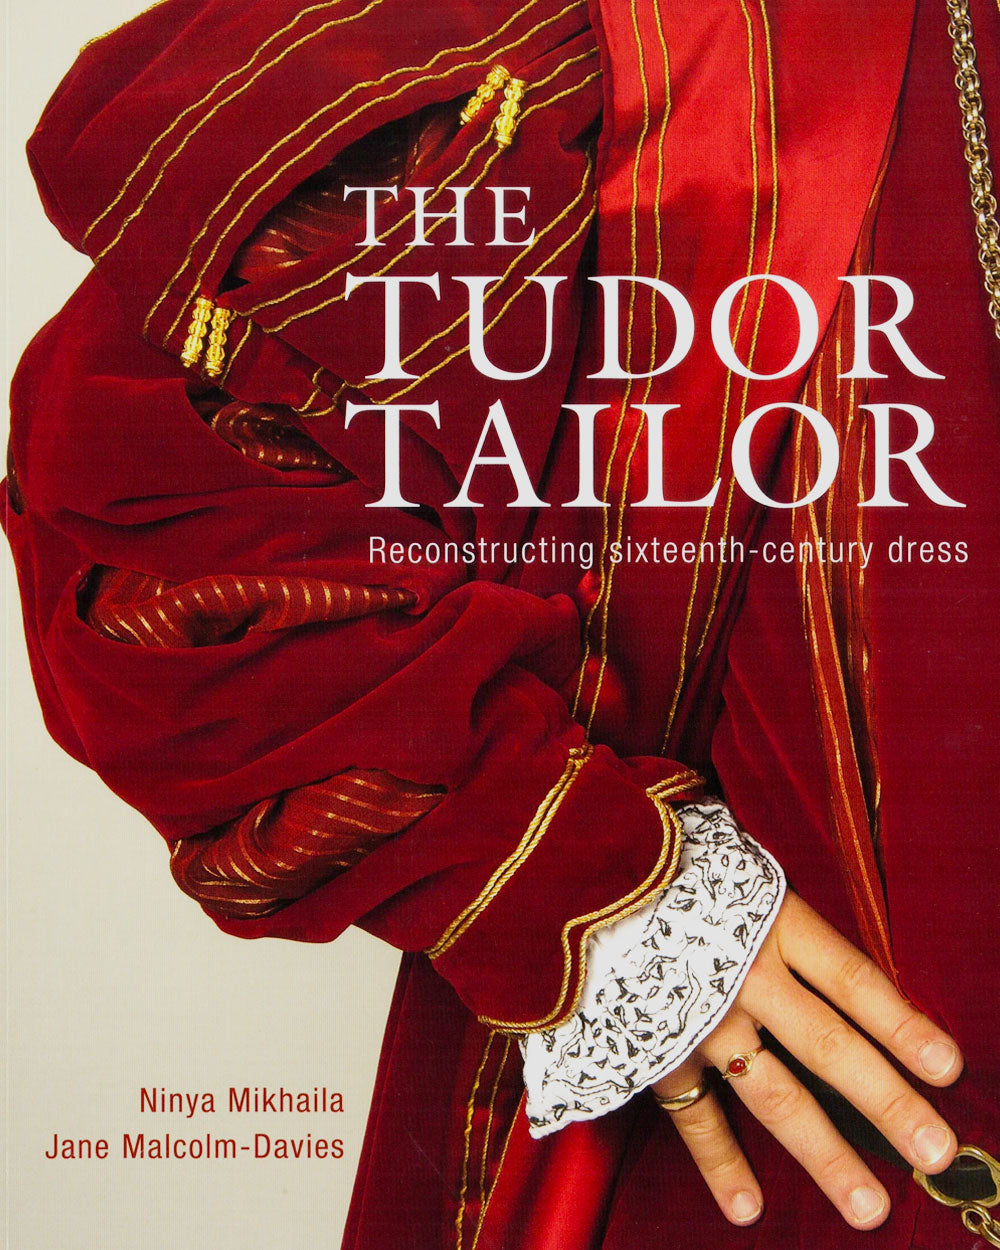 Combined book offer:  The Tudor Tailor & The Tudor Child